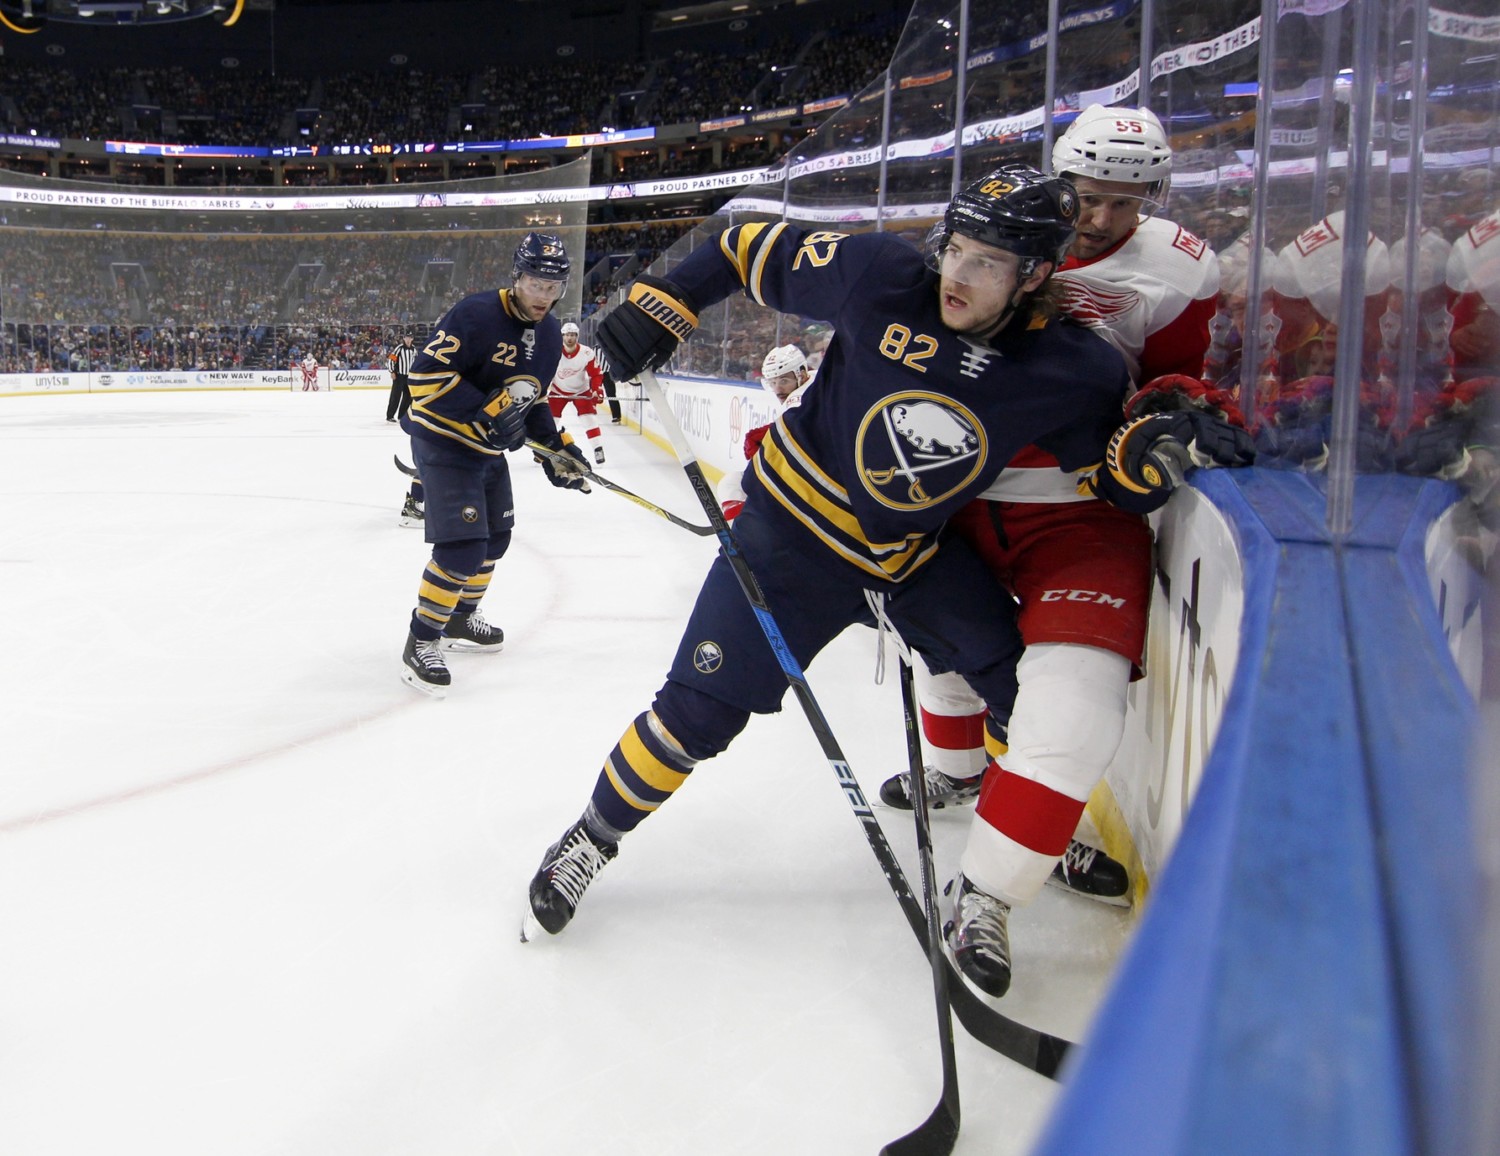 Report that Buffalo Sabres Nathan Beaulieu has requested a trade.